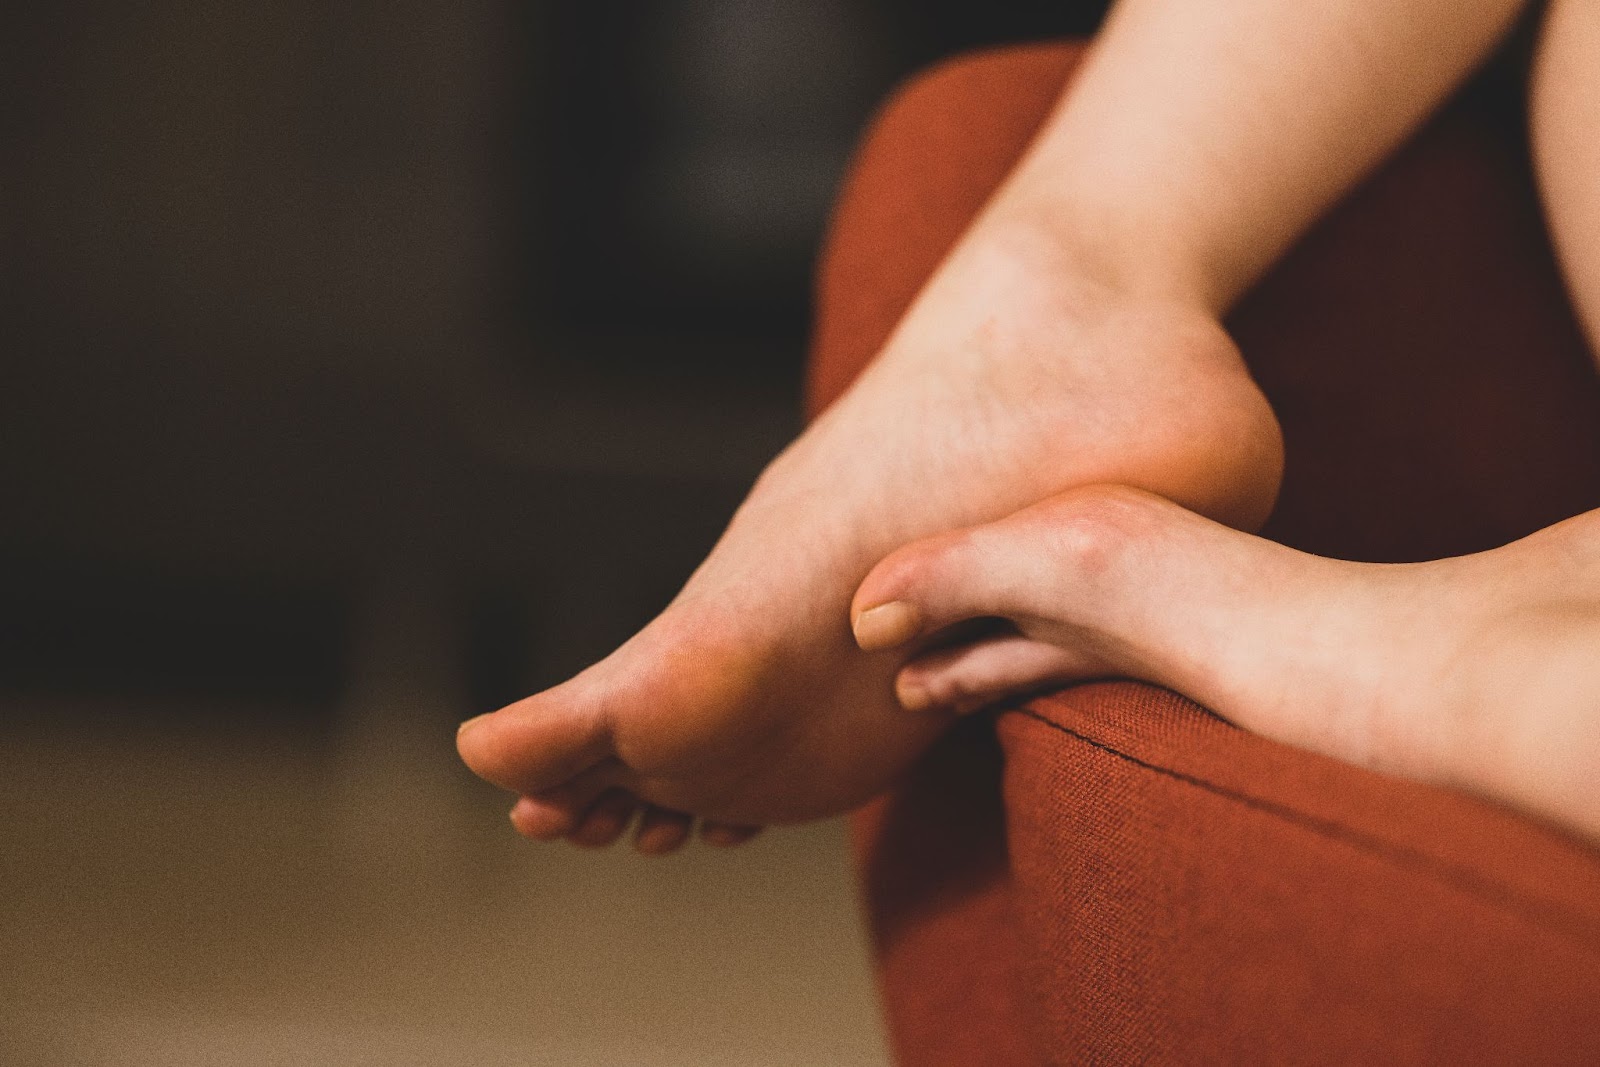 A woman's feet on a couch